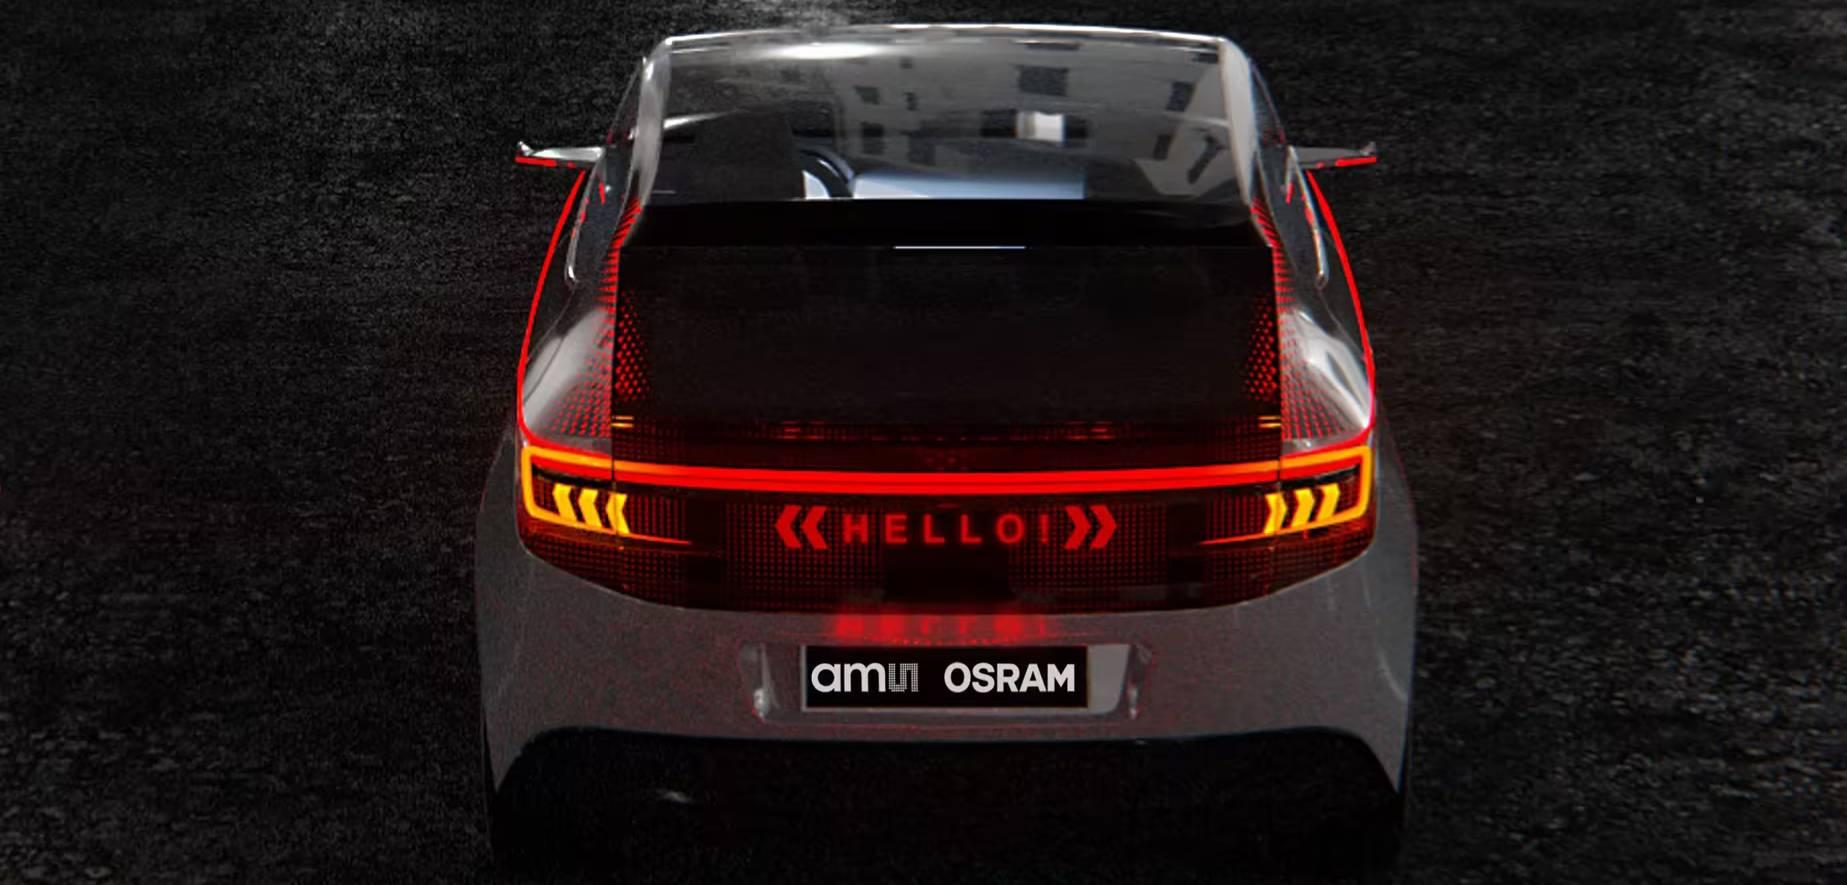 Bold and dramatic rear lamp designs are now easier to realize with either fewer LEDs or a thinner optical assembly while maintaining a very high level of homogeneity.